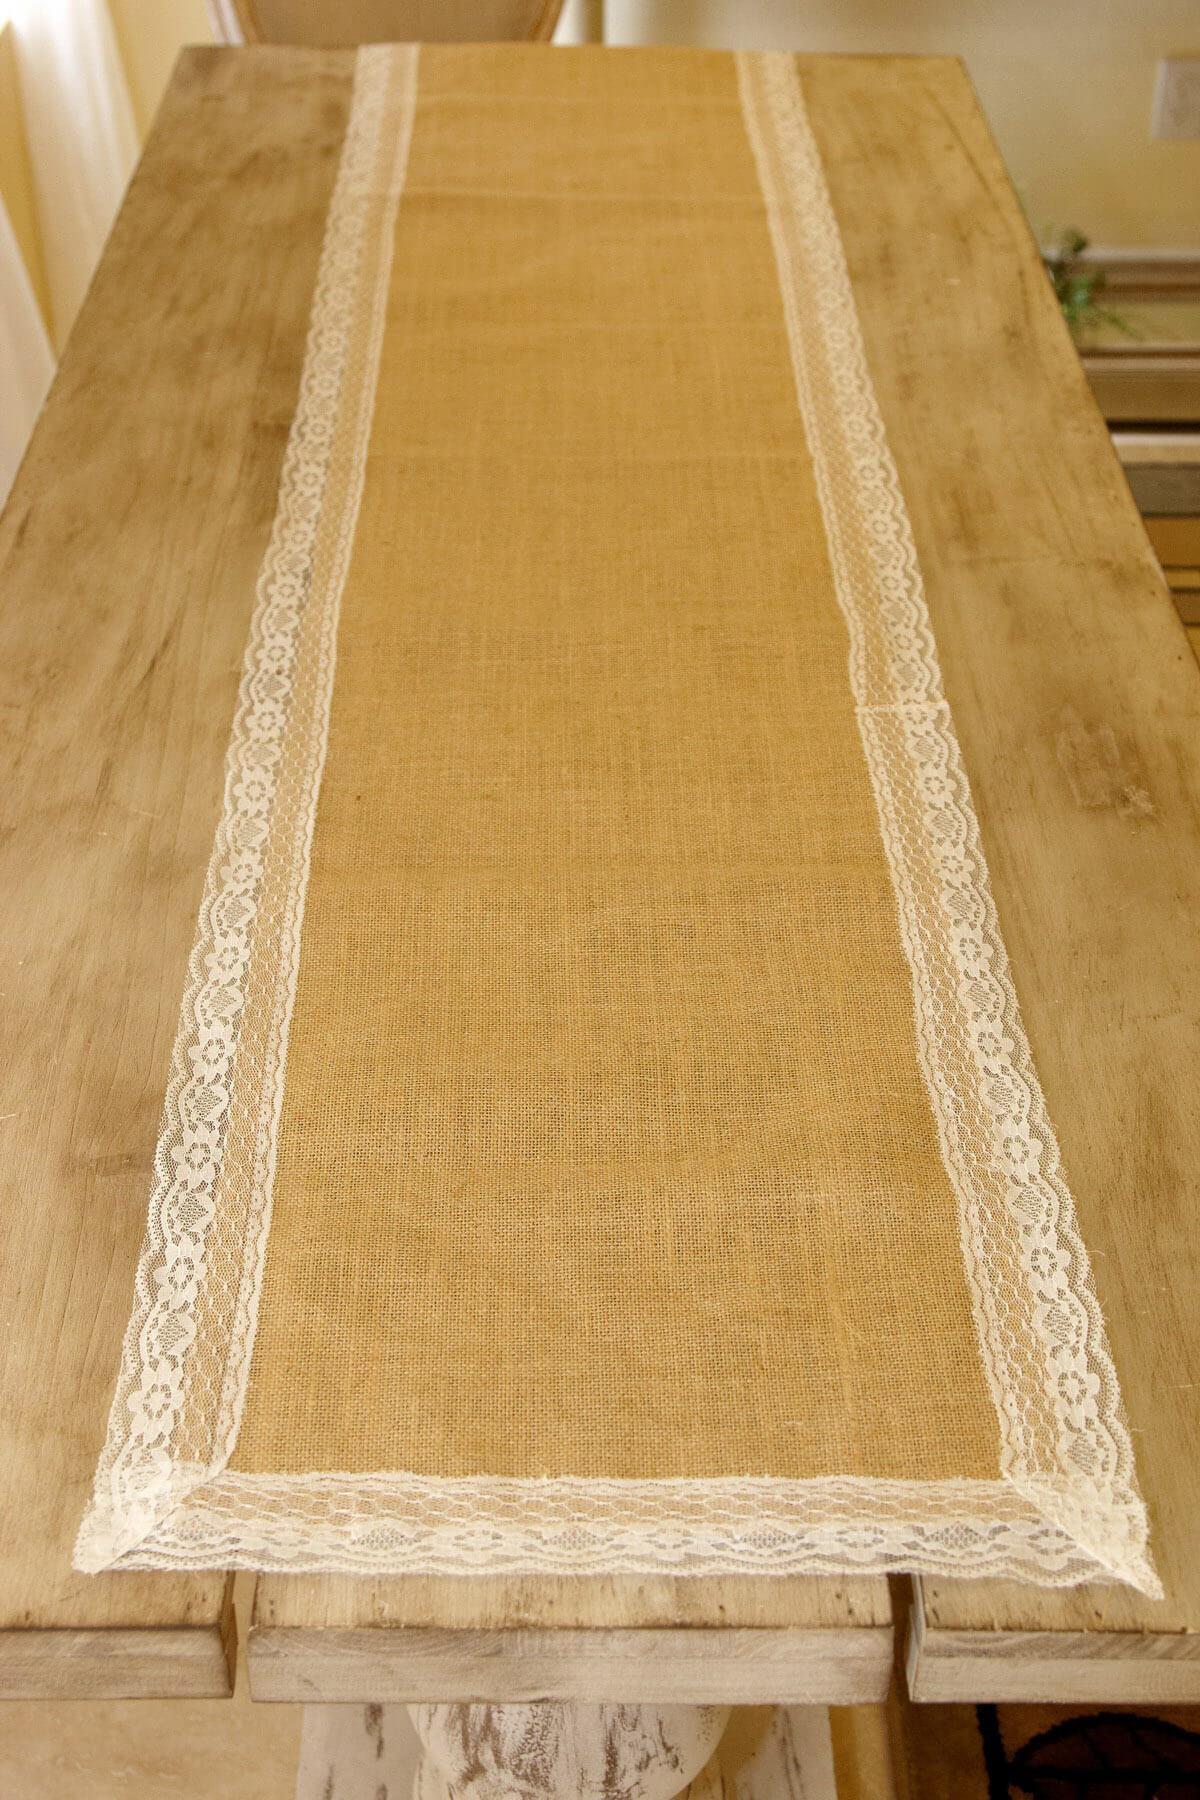 Burlap & Lace Table Runner 16 x 74in